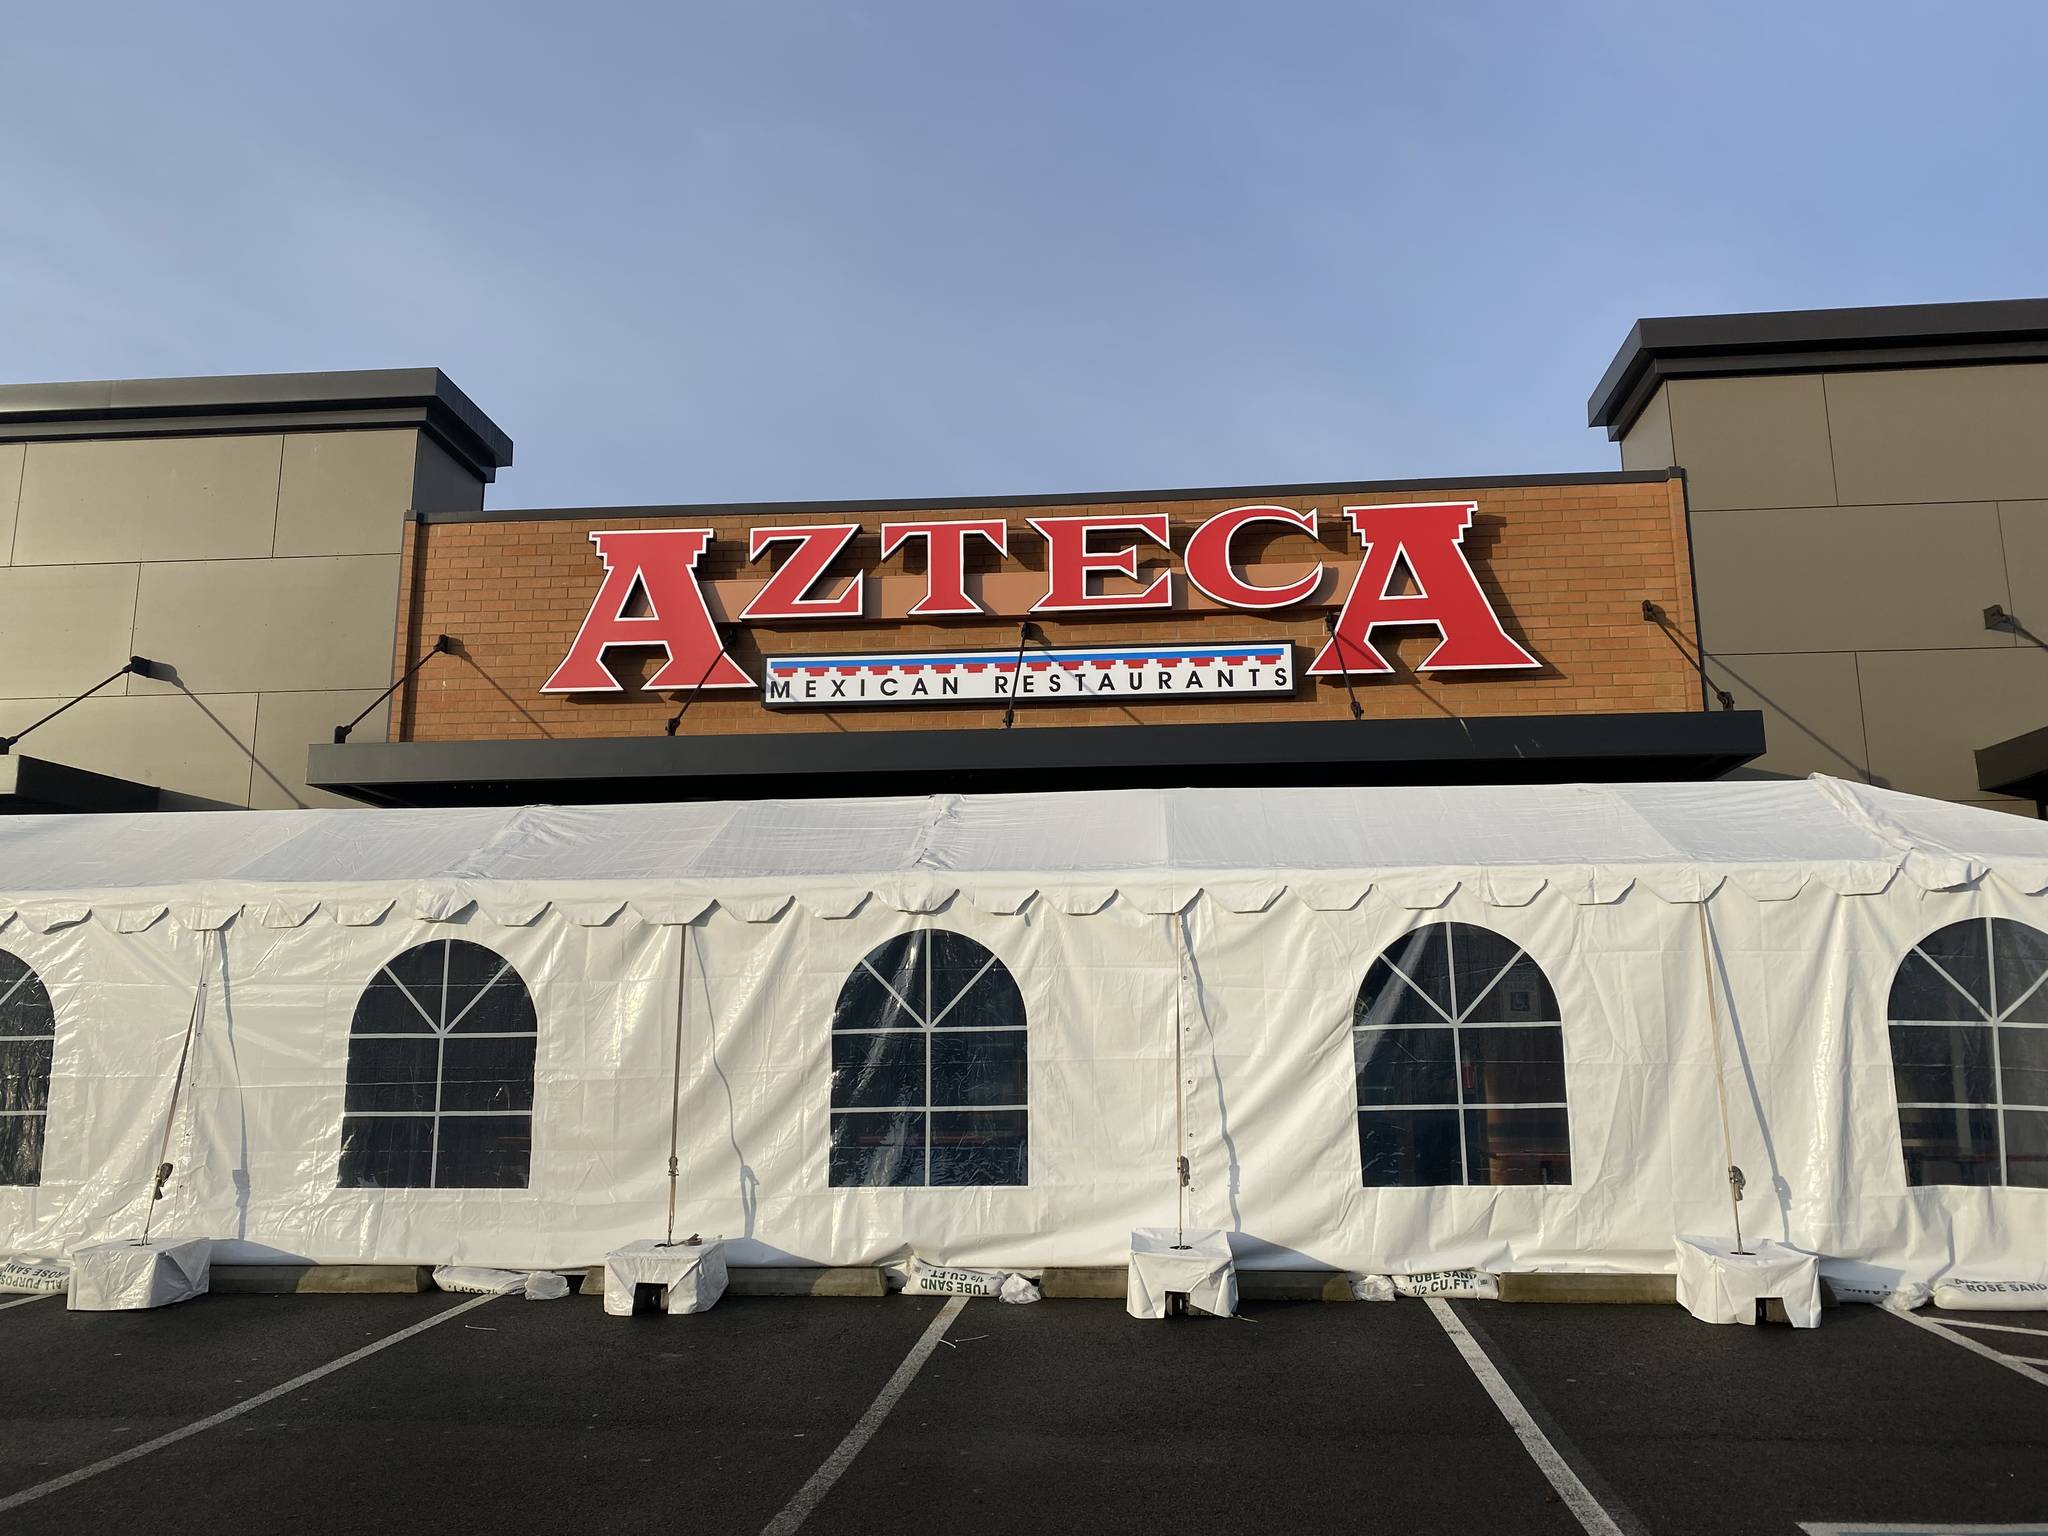 Restaurants in the region have been erecting outdoor seating in tents during the pandemic, as seen here at Azteca Mexican Restaurant in Federal Way. In Phase 2, restaurants can reopen at a maximum 25% capacity and a limit of six people per table. File photo